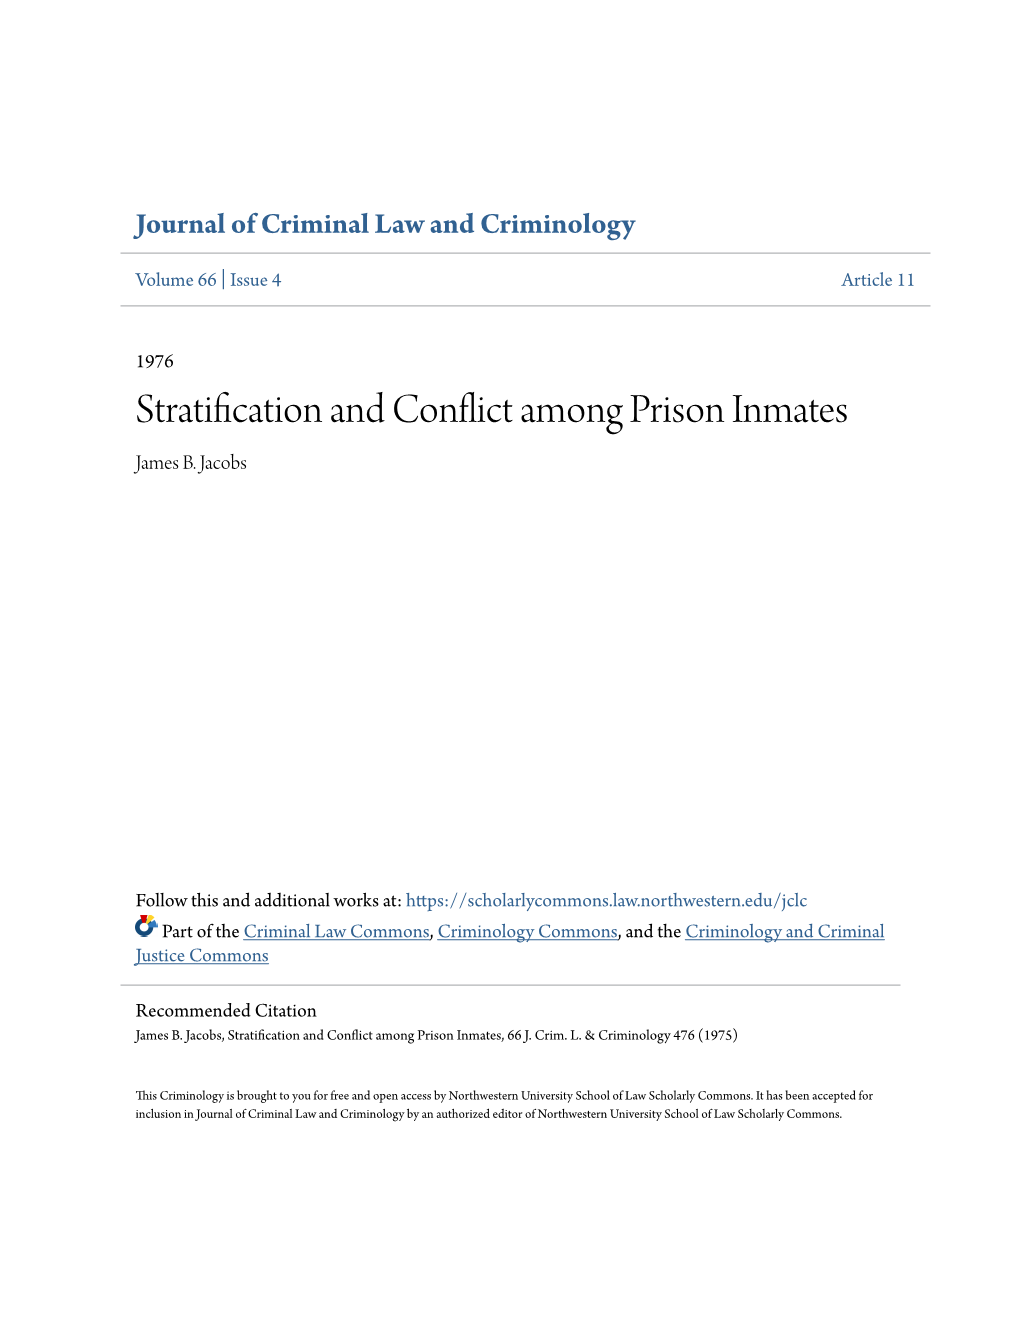 Stratification and Conflict Among Prison Inmates James B